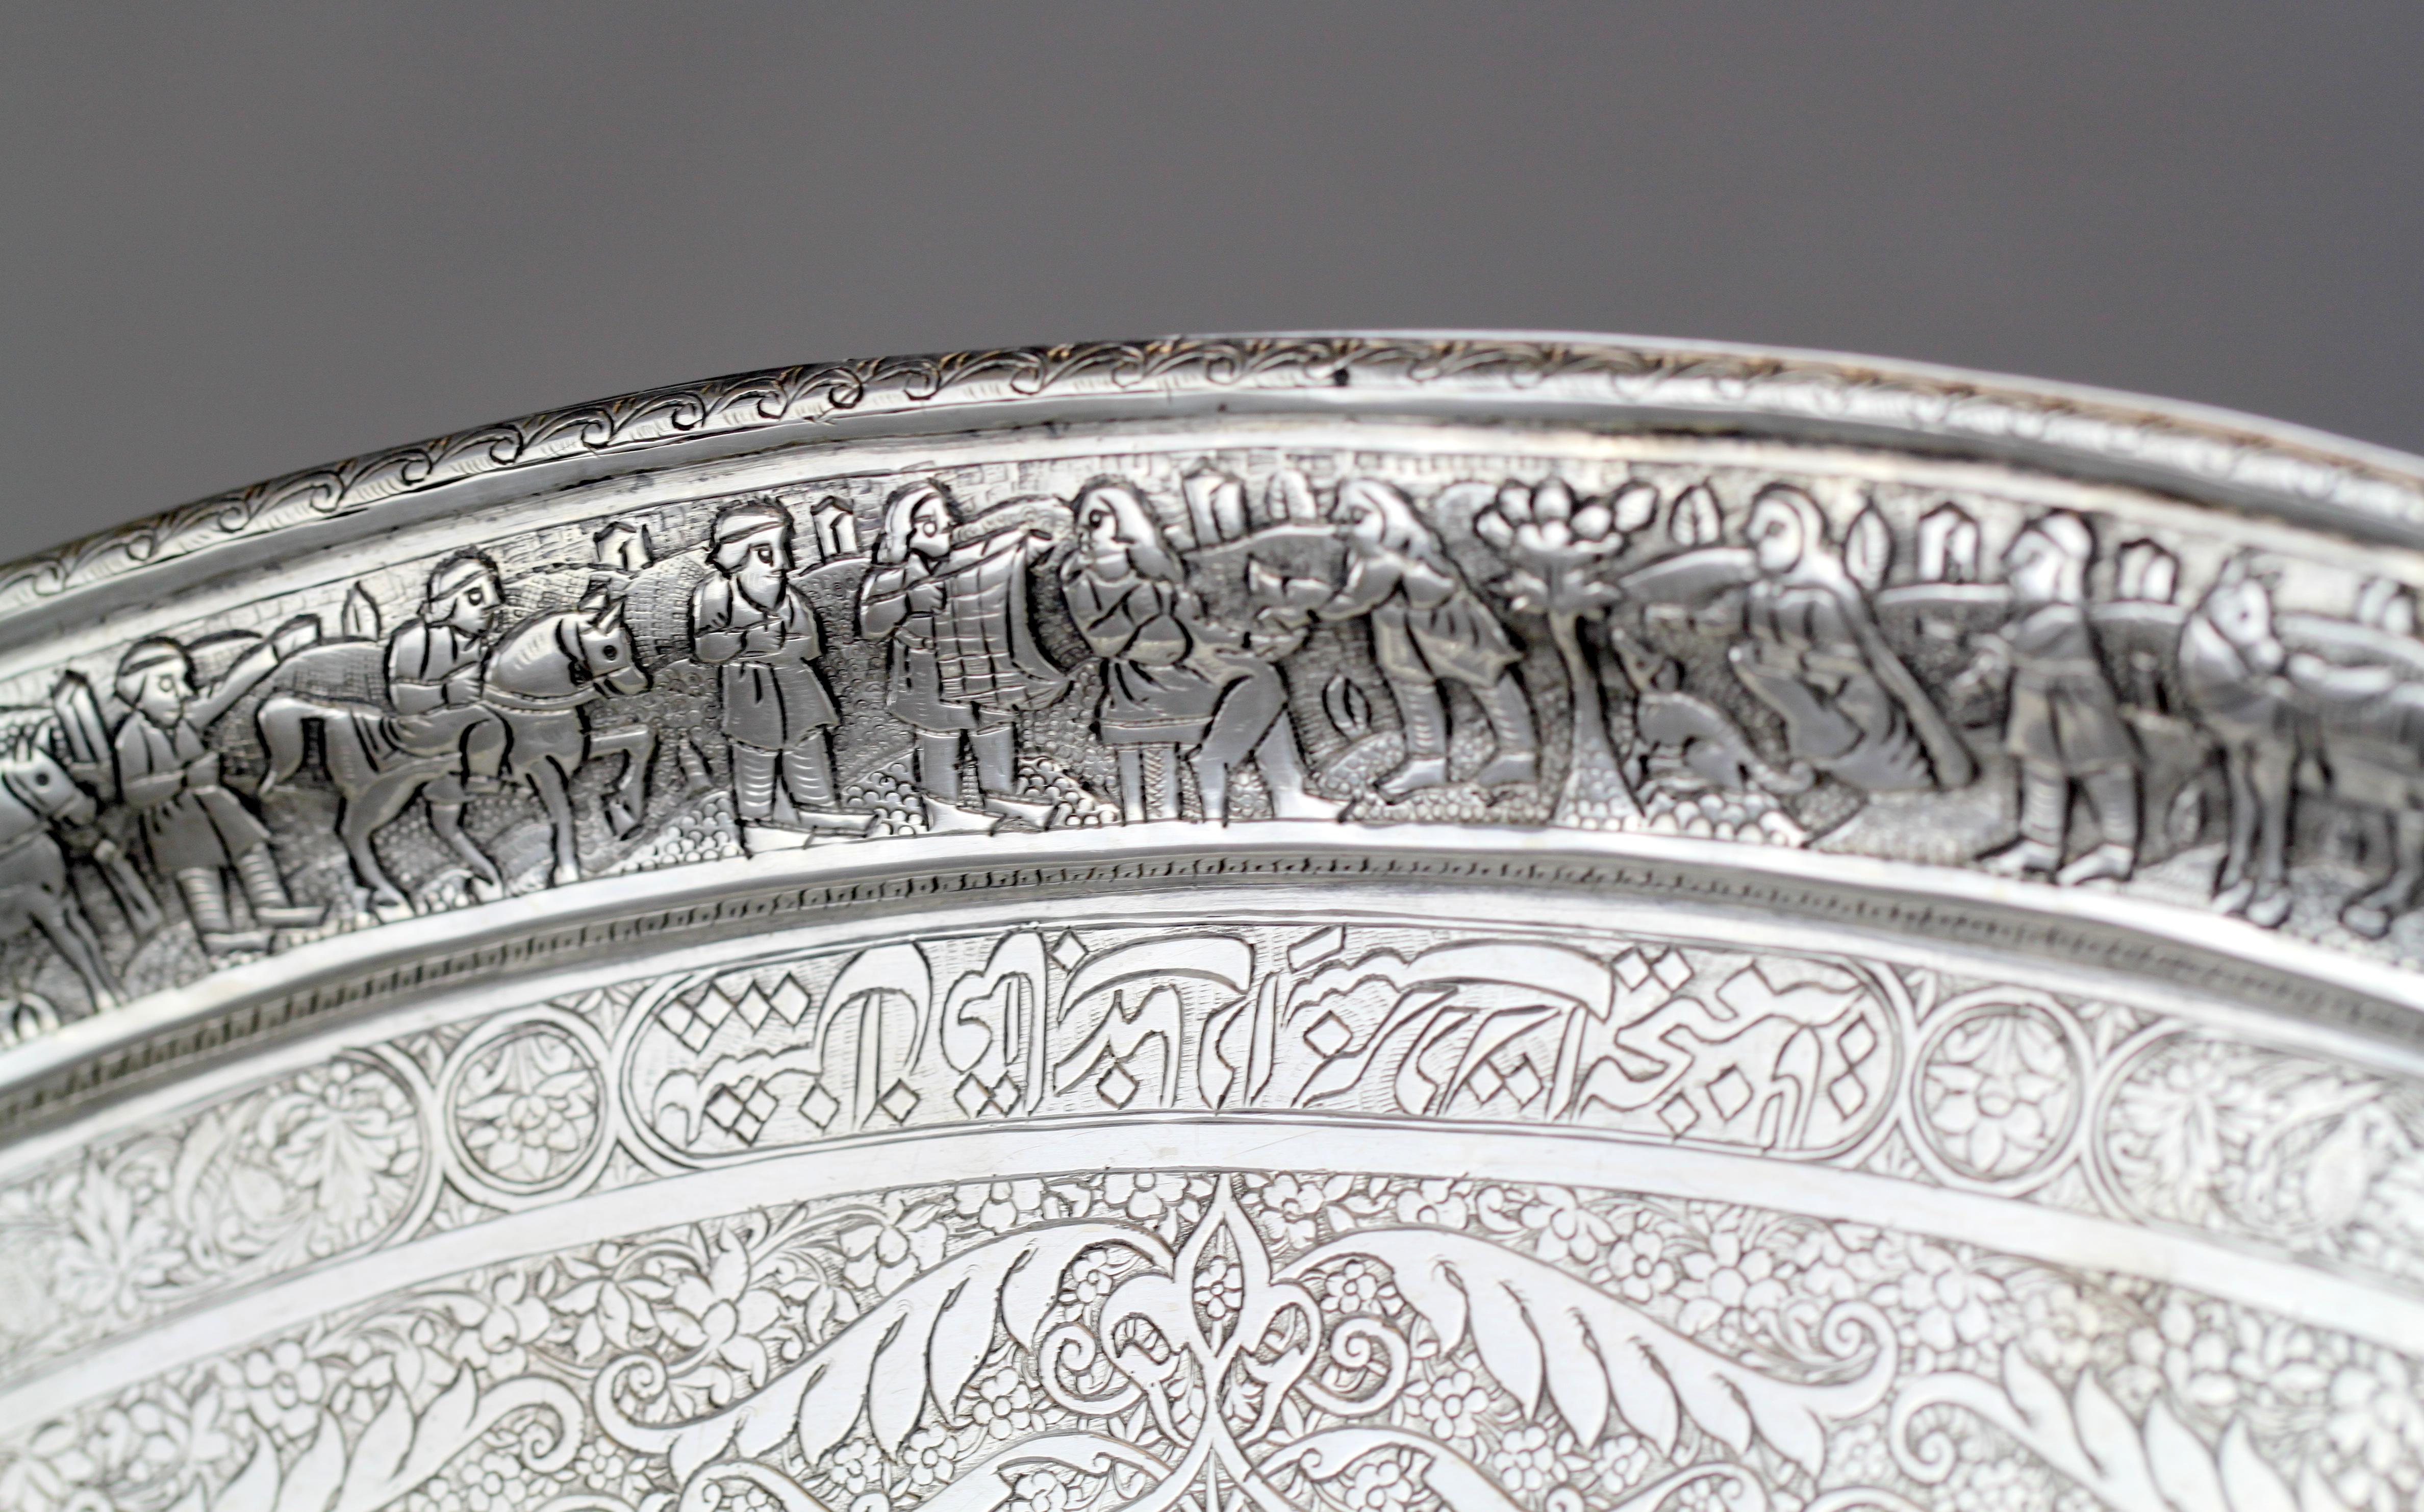 Antique Persian / Islamic silver tray,
circa late 19th century.
Maker: Unidentified.
Fully hallmarked
875 / 1000 silver. 

Dimensions: 
Size: 35.5 x 23.8 x 2 cm 
Weight: 514 grams .

Condition: Tray has some general usage wear and tear